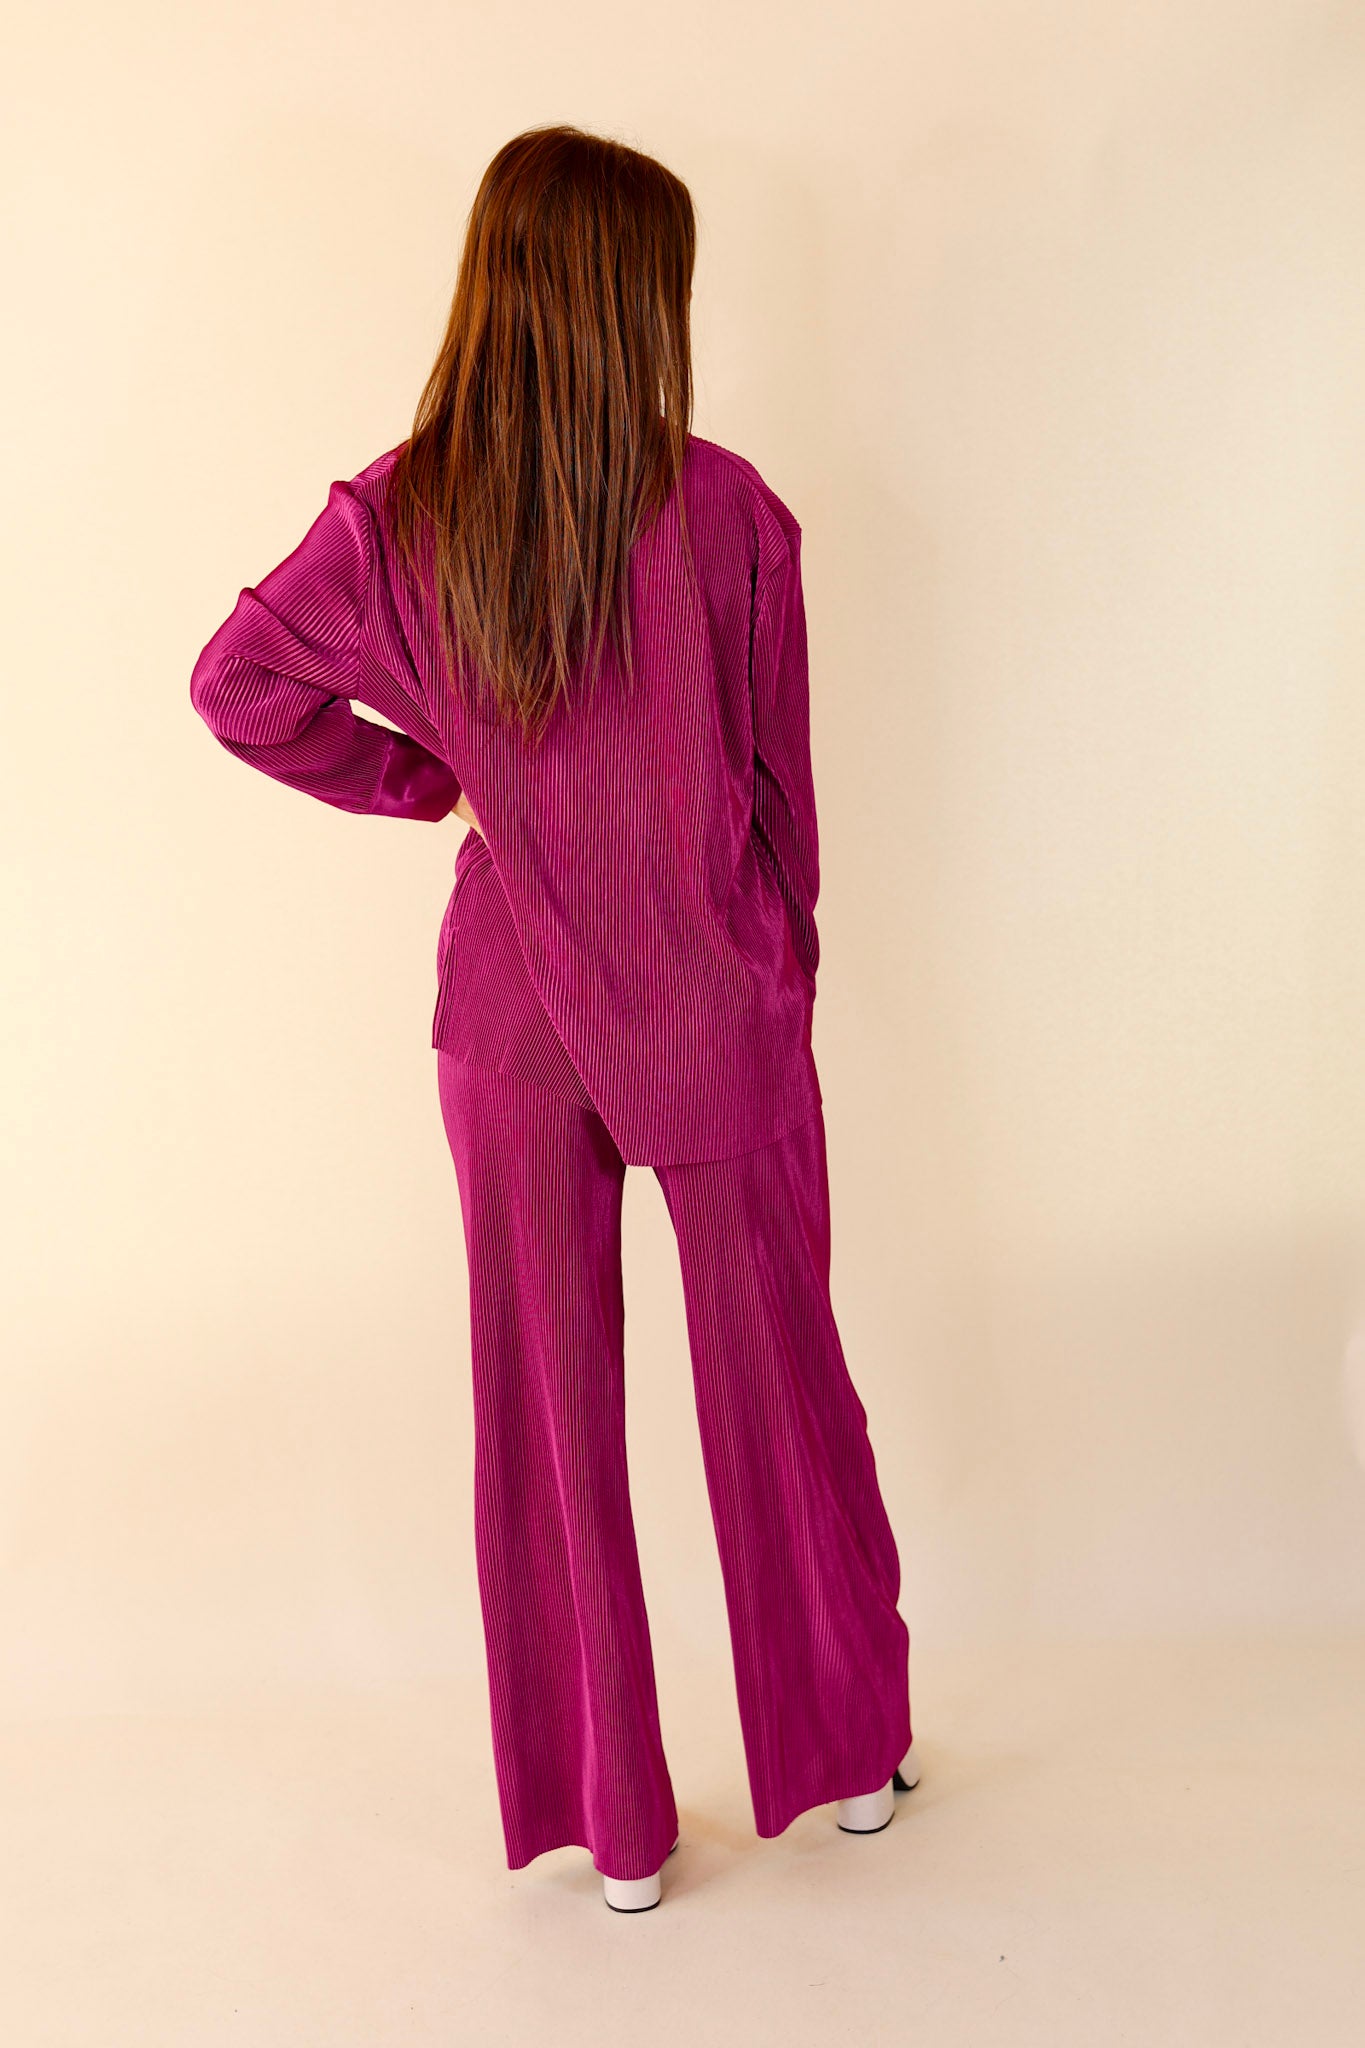 Dazzling Satin Plissé Ribbed Button Up Top in Magenta - Giddy Up Glamour Boutique